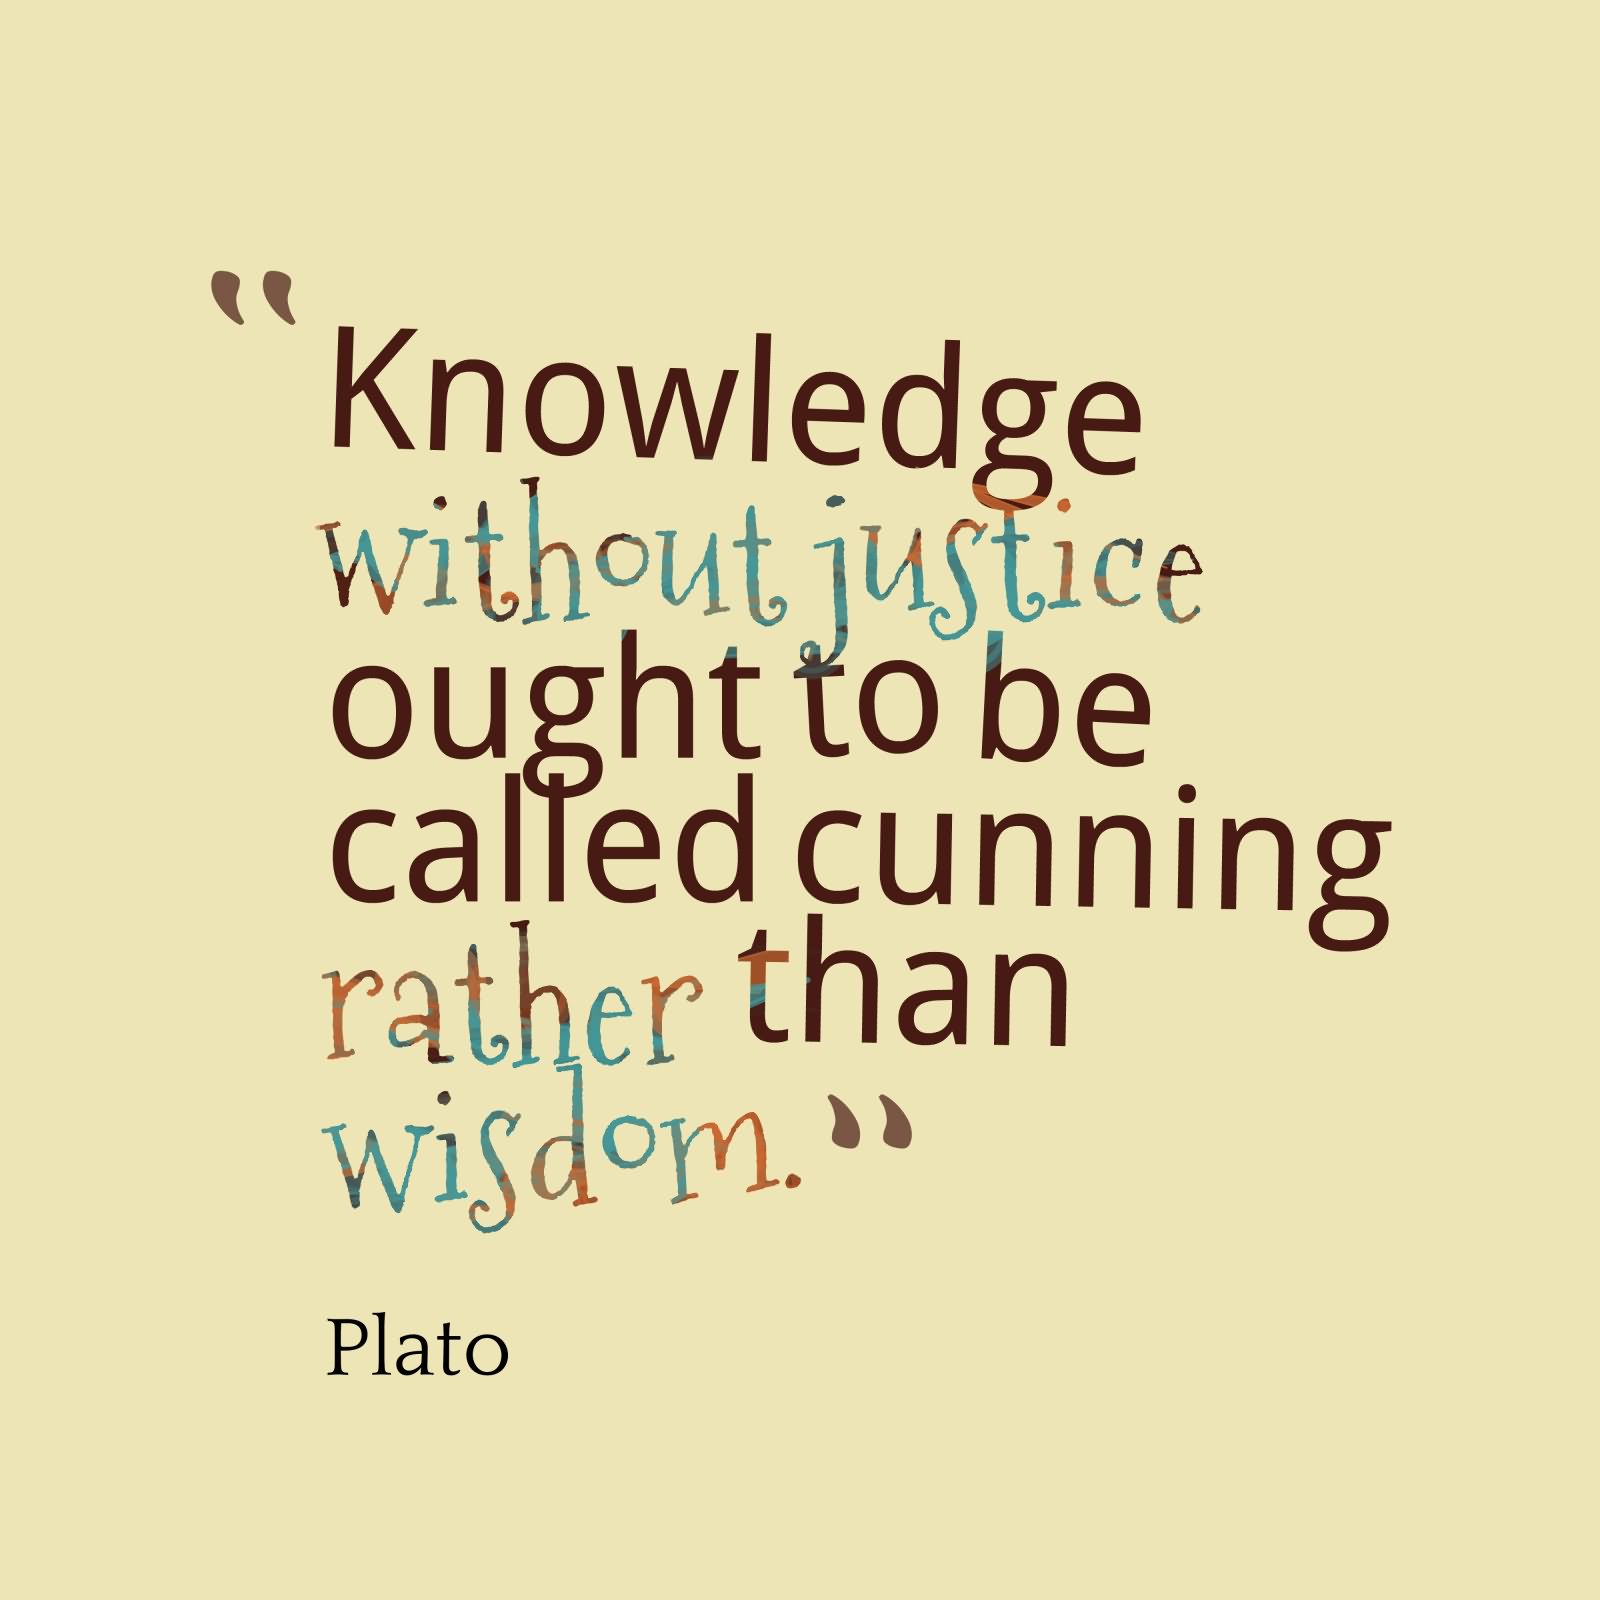 Knowledge without justice ought to be called cunning rather than wisdom. - Plato